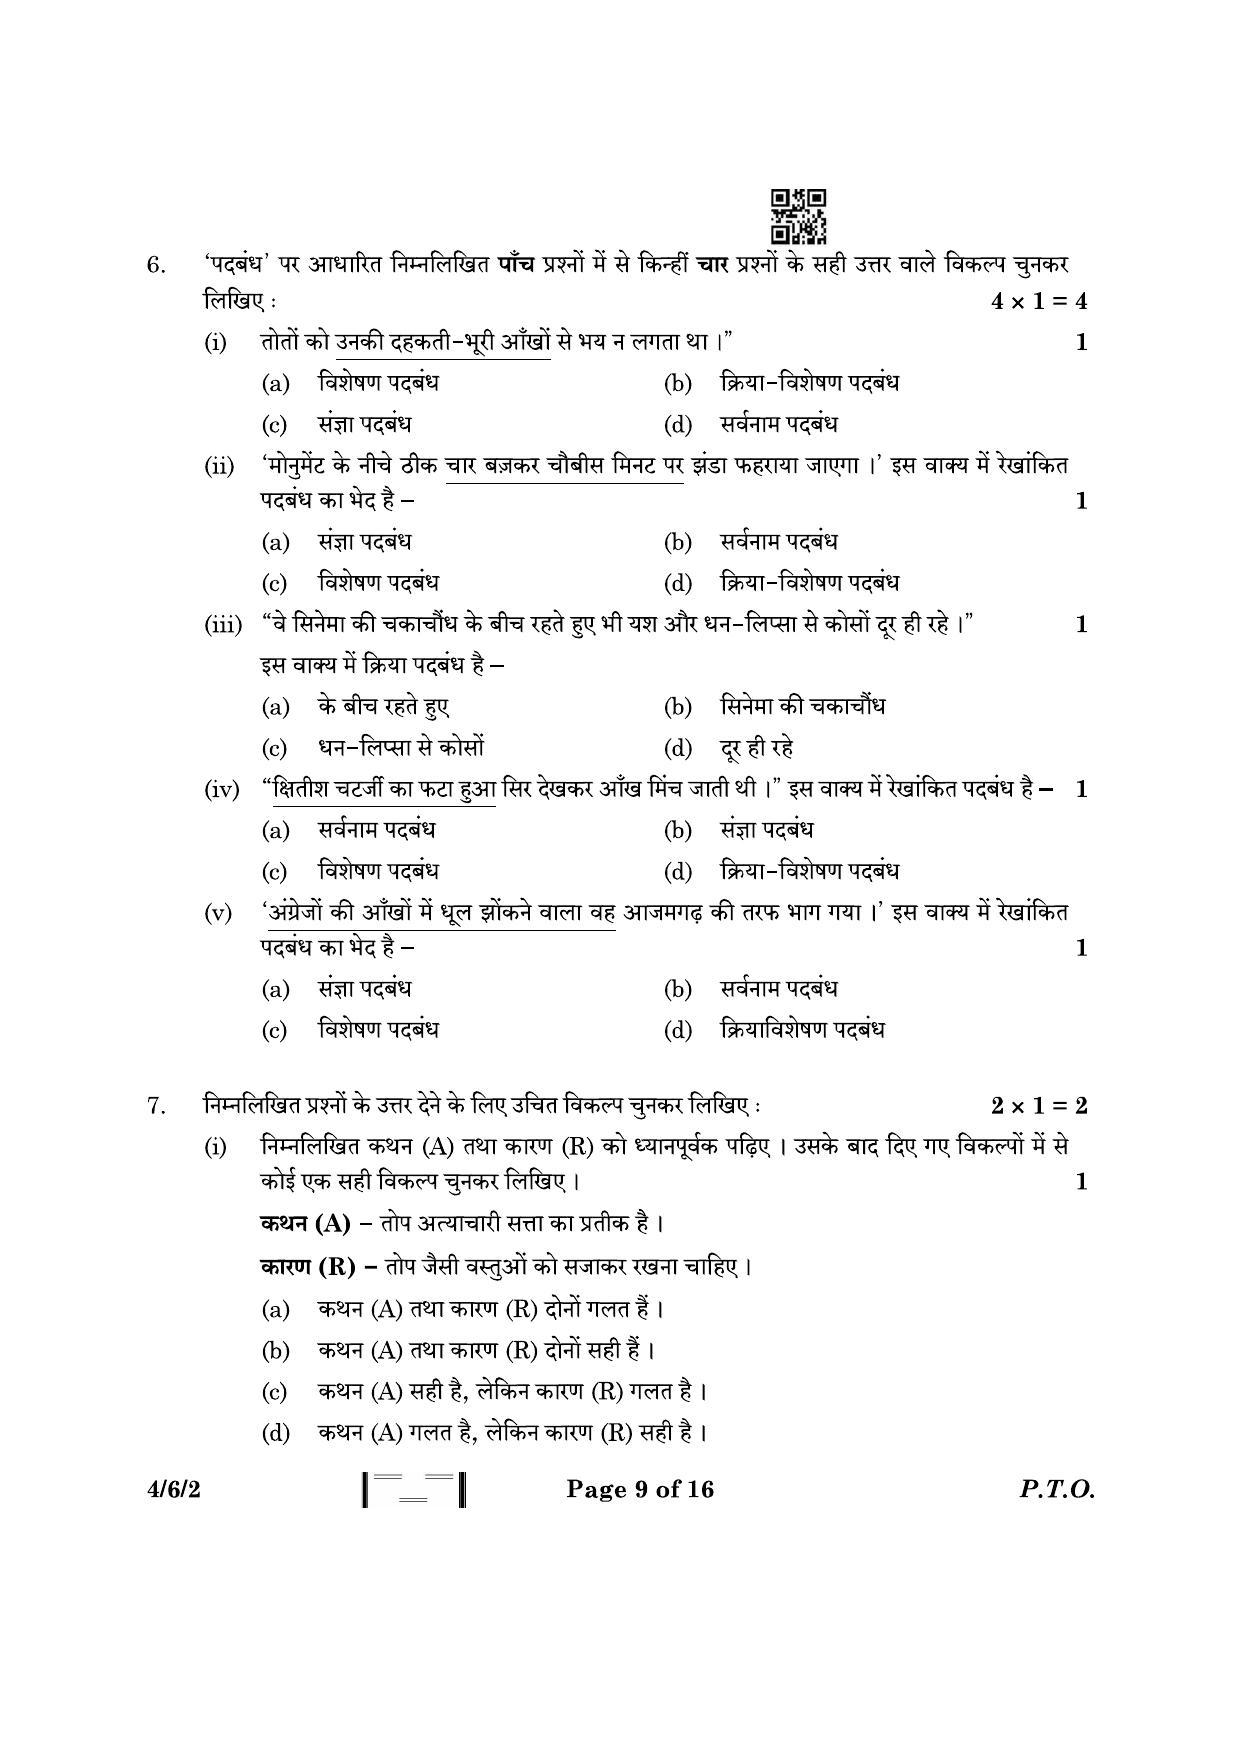 CBSE Class 10 4-6-2 Hindi B 2023 Question Paper - Page 9